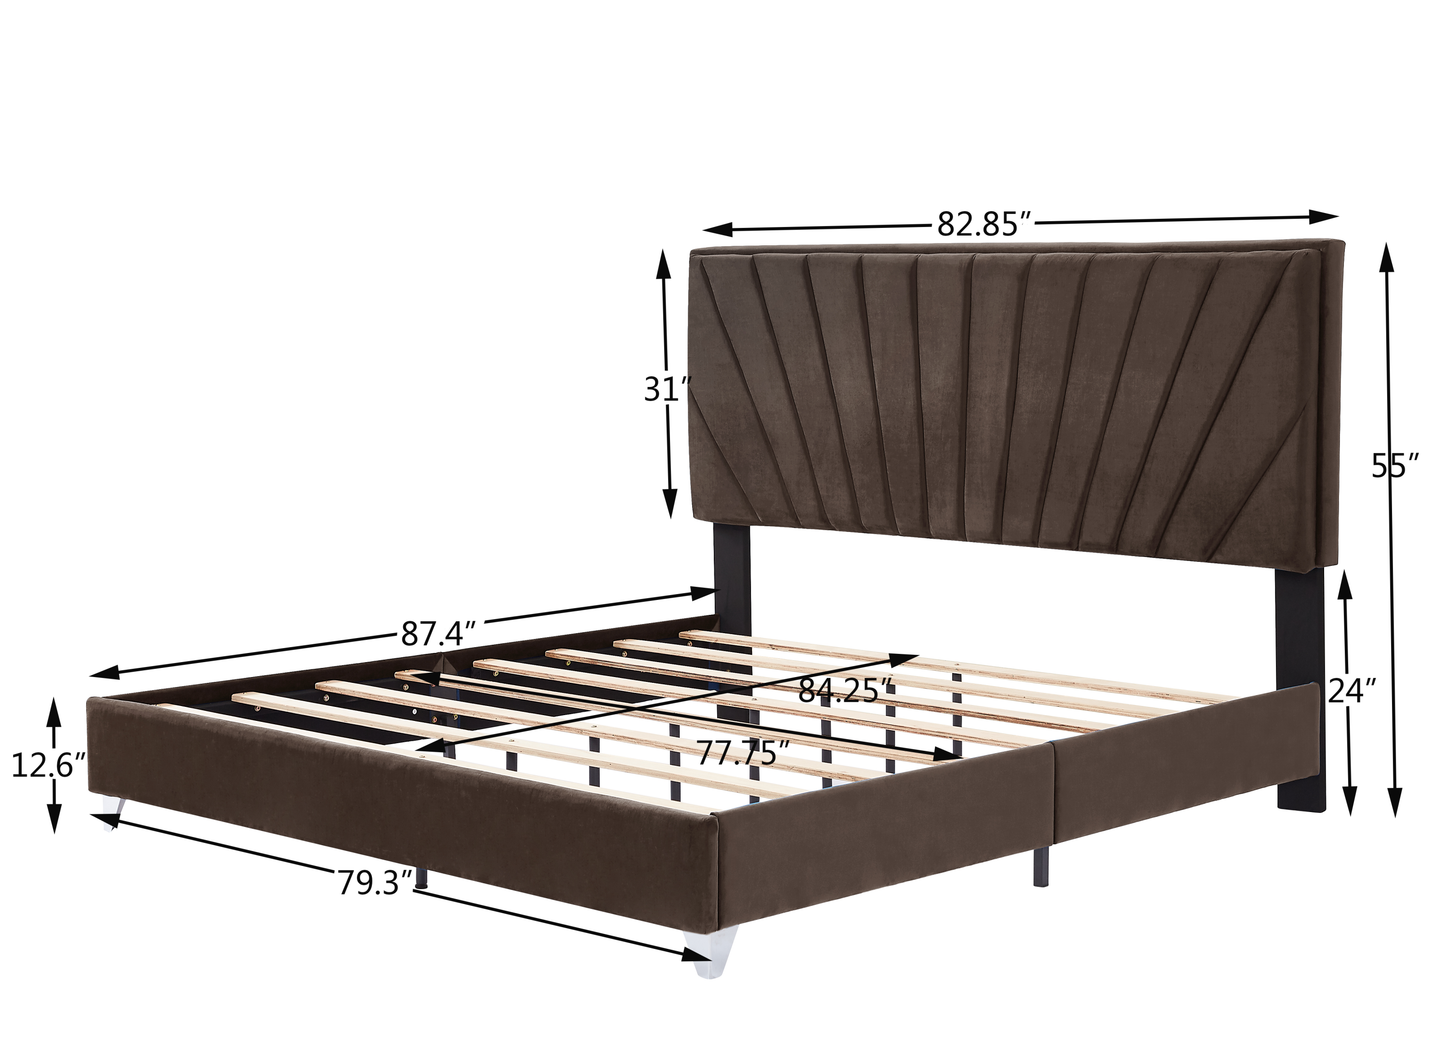 Sun King Bed (brown)